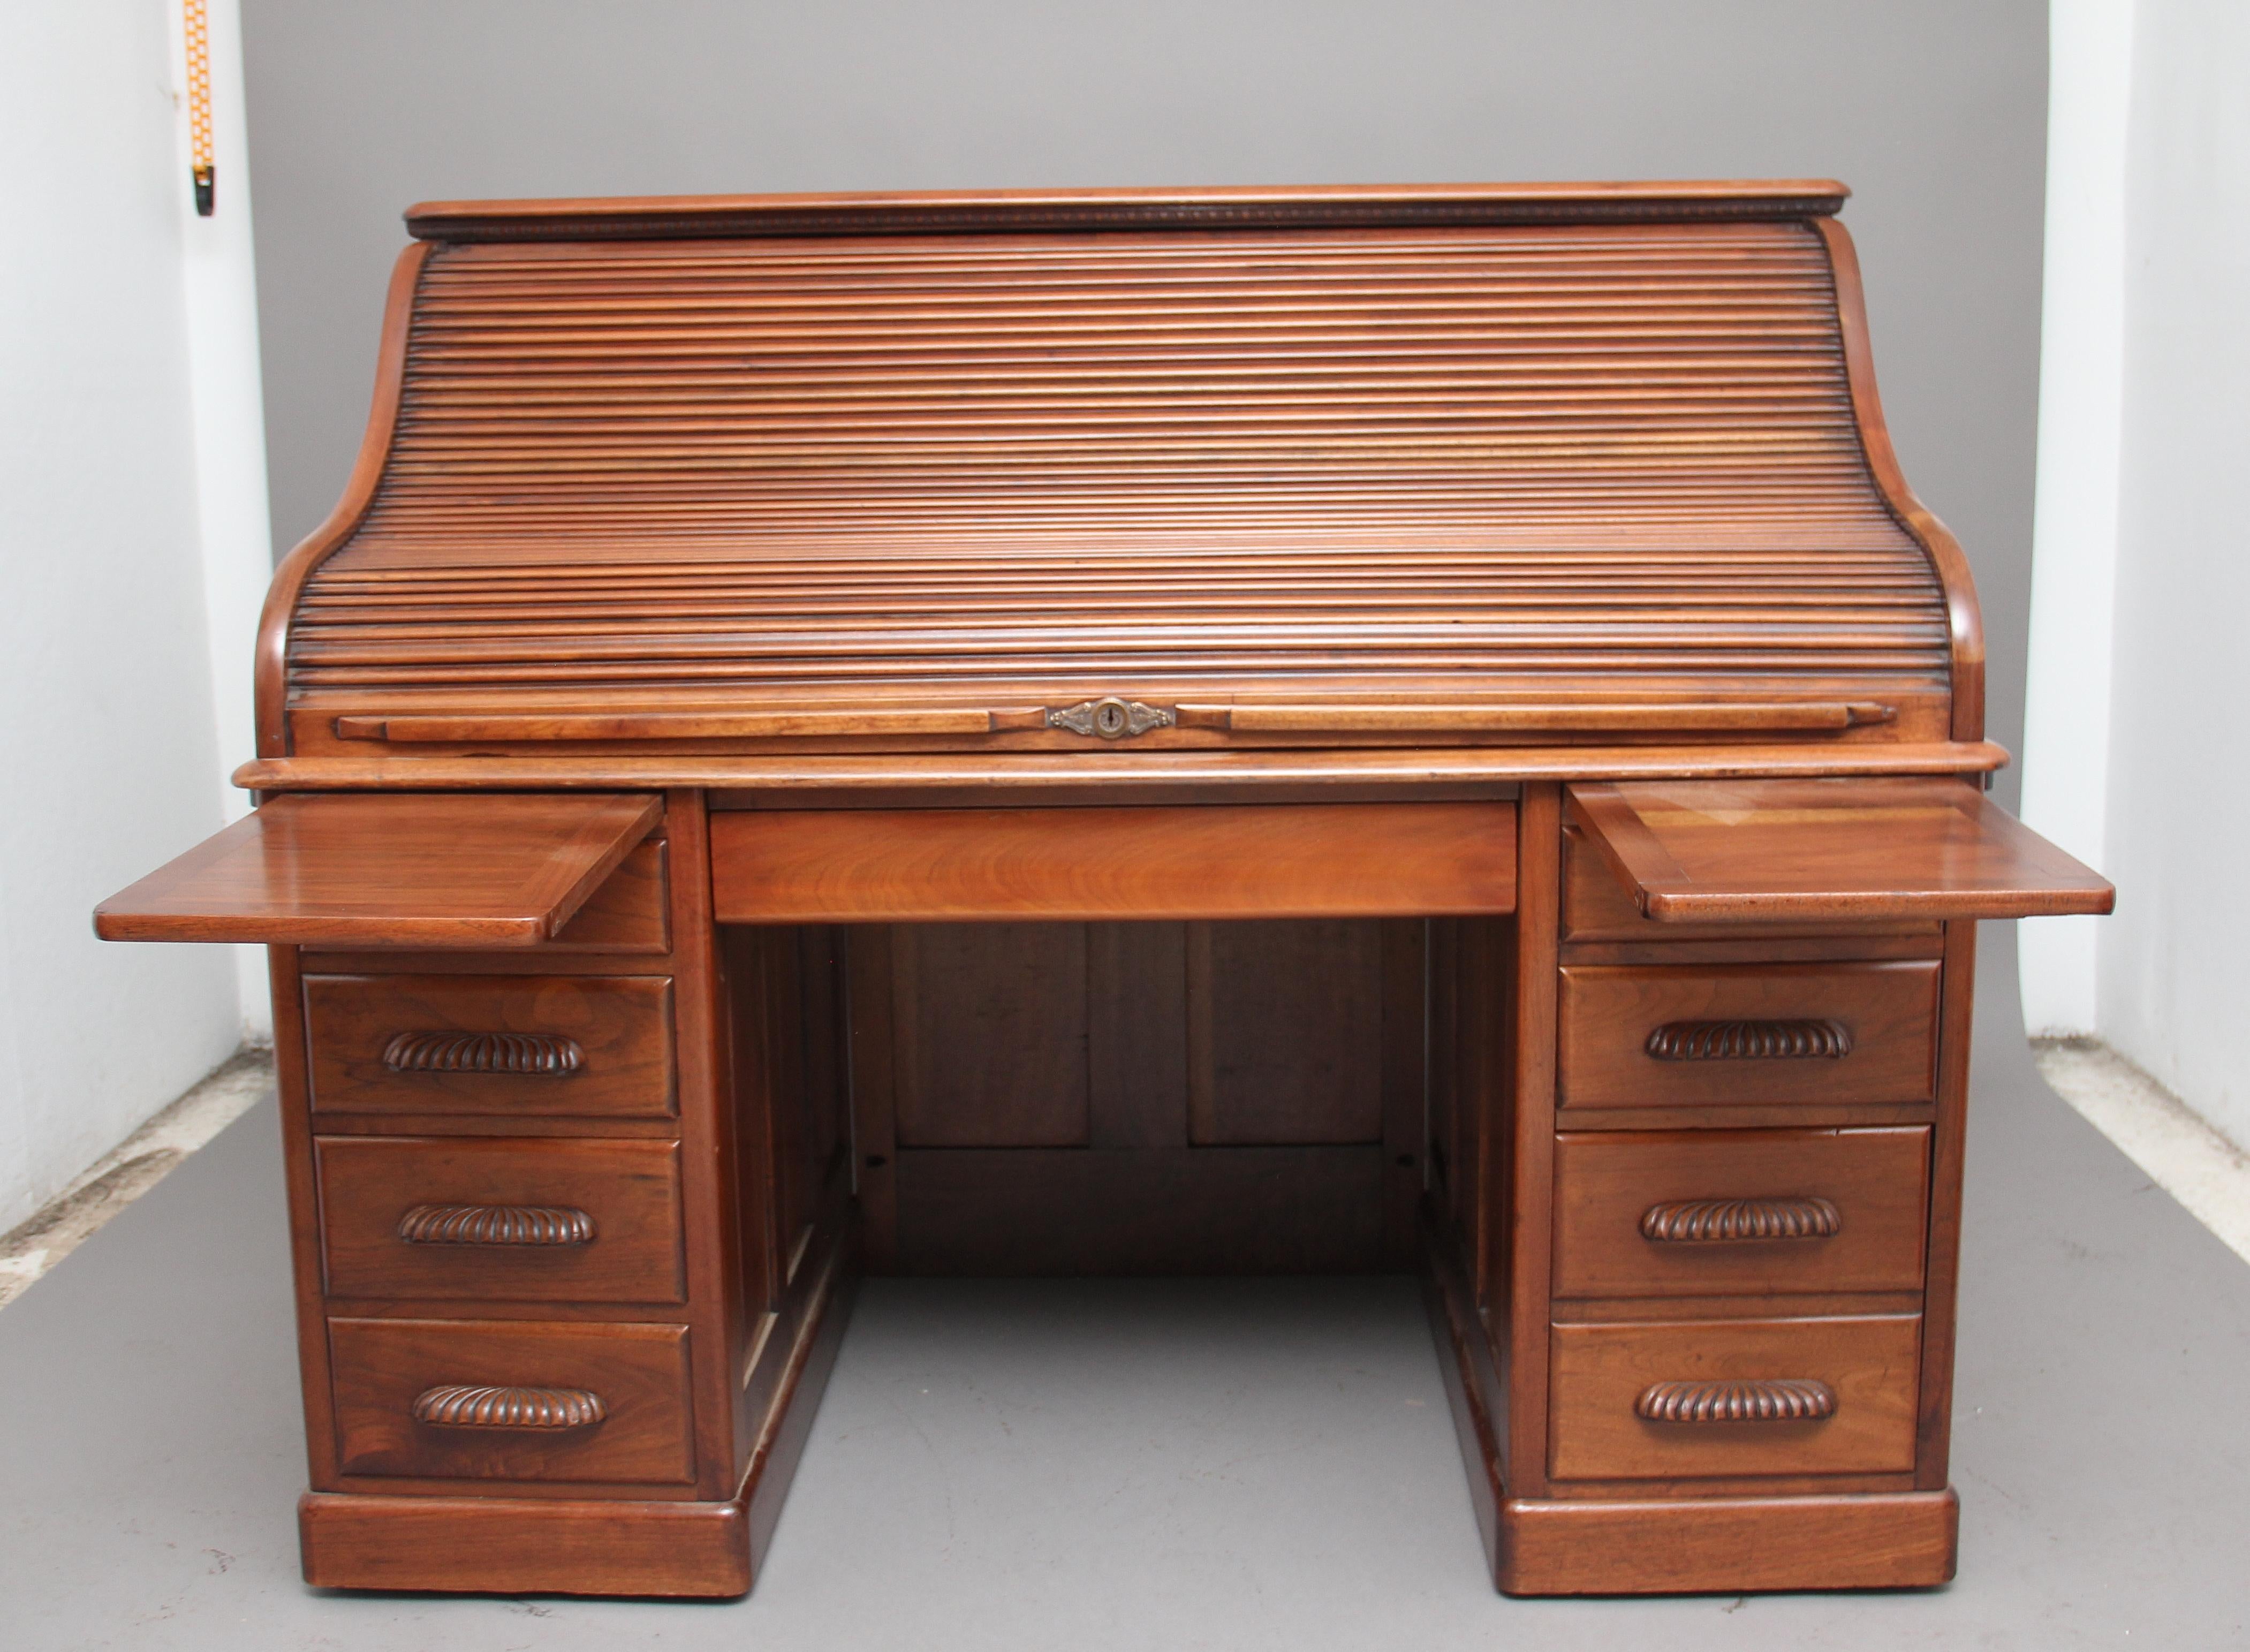 Early 20th century walnut roll top desk, the molded edge top with decorative carved beading underneath, the tambour roller top opening to reveal a selection of drawers, pigeon holes, compartments and a large writing surface, below there is a frieze